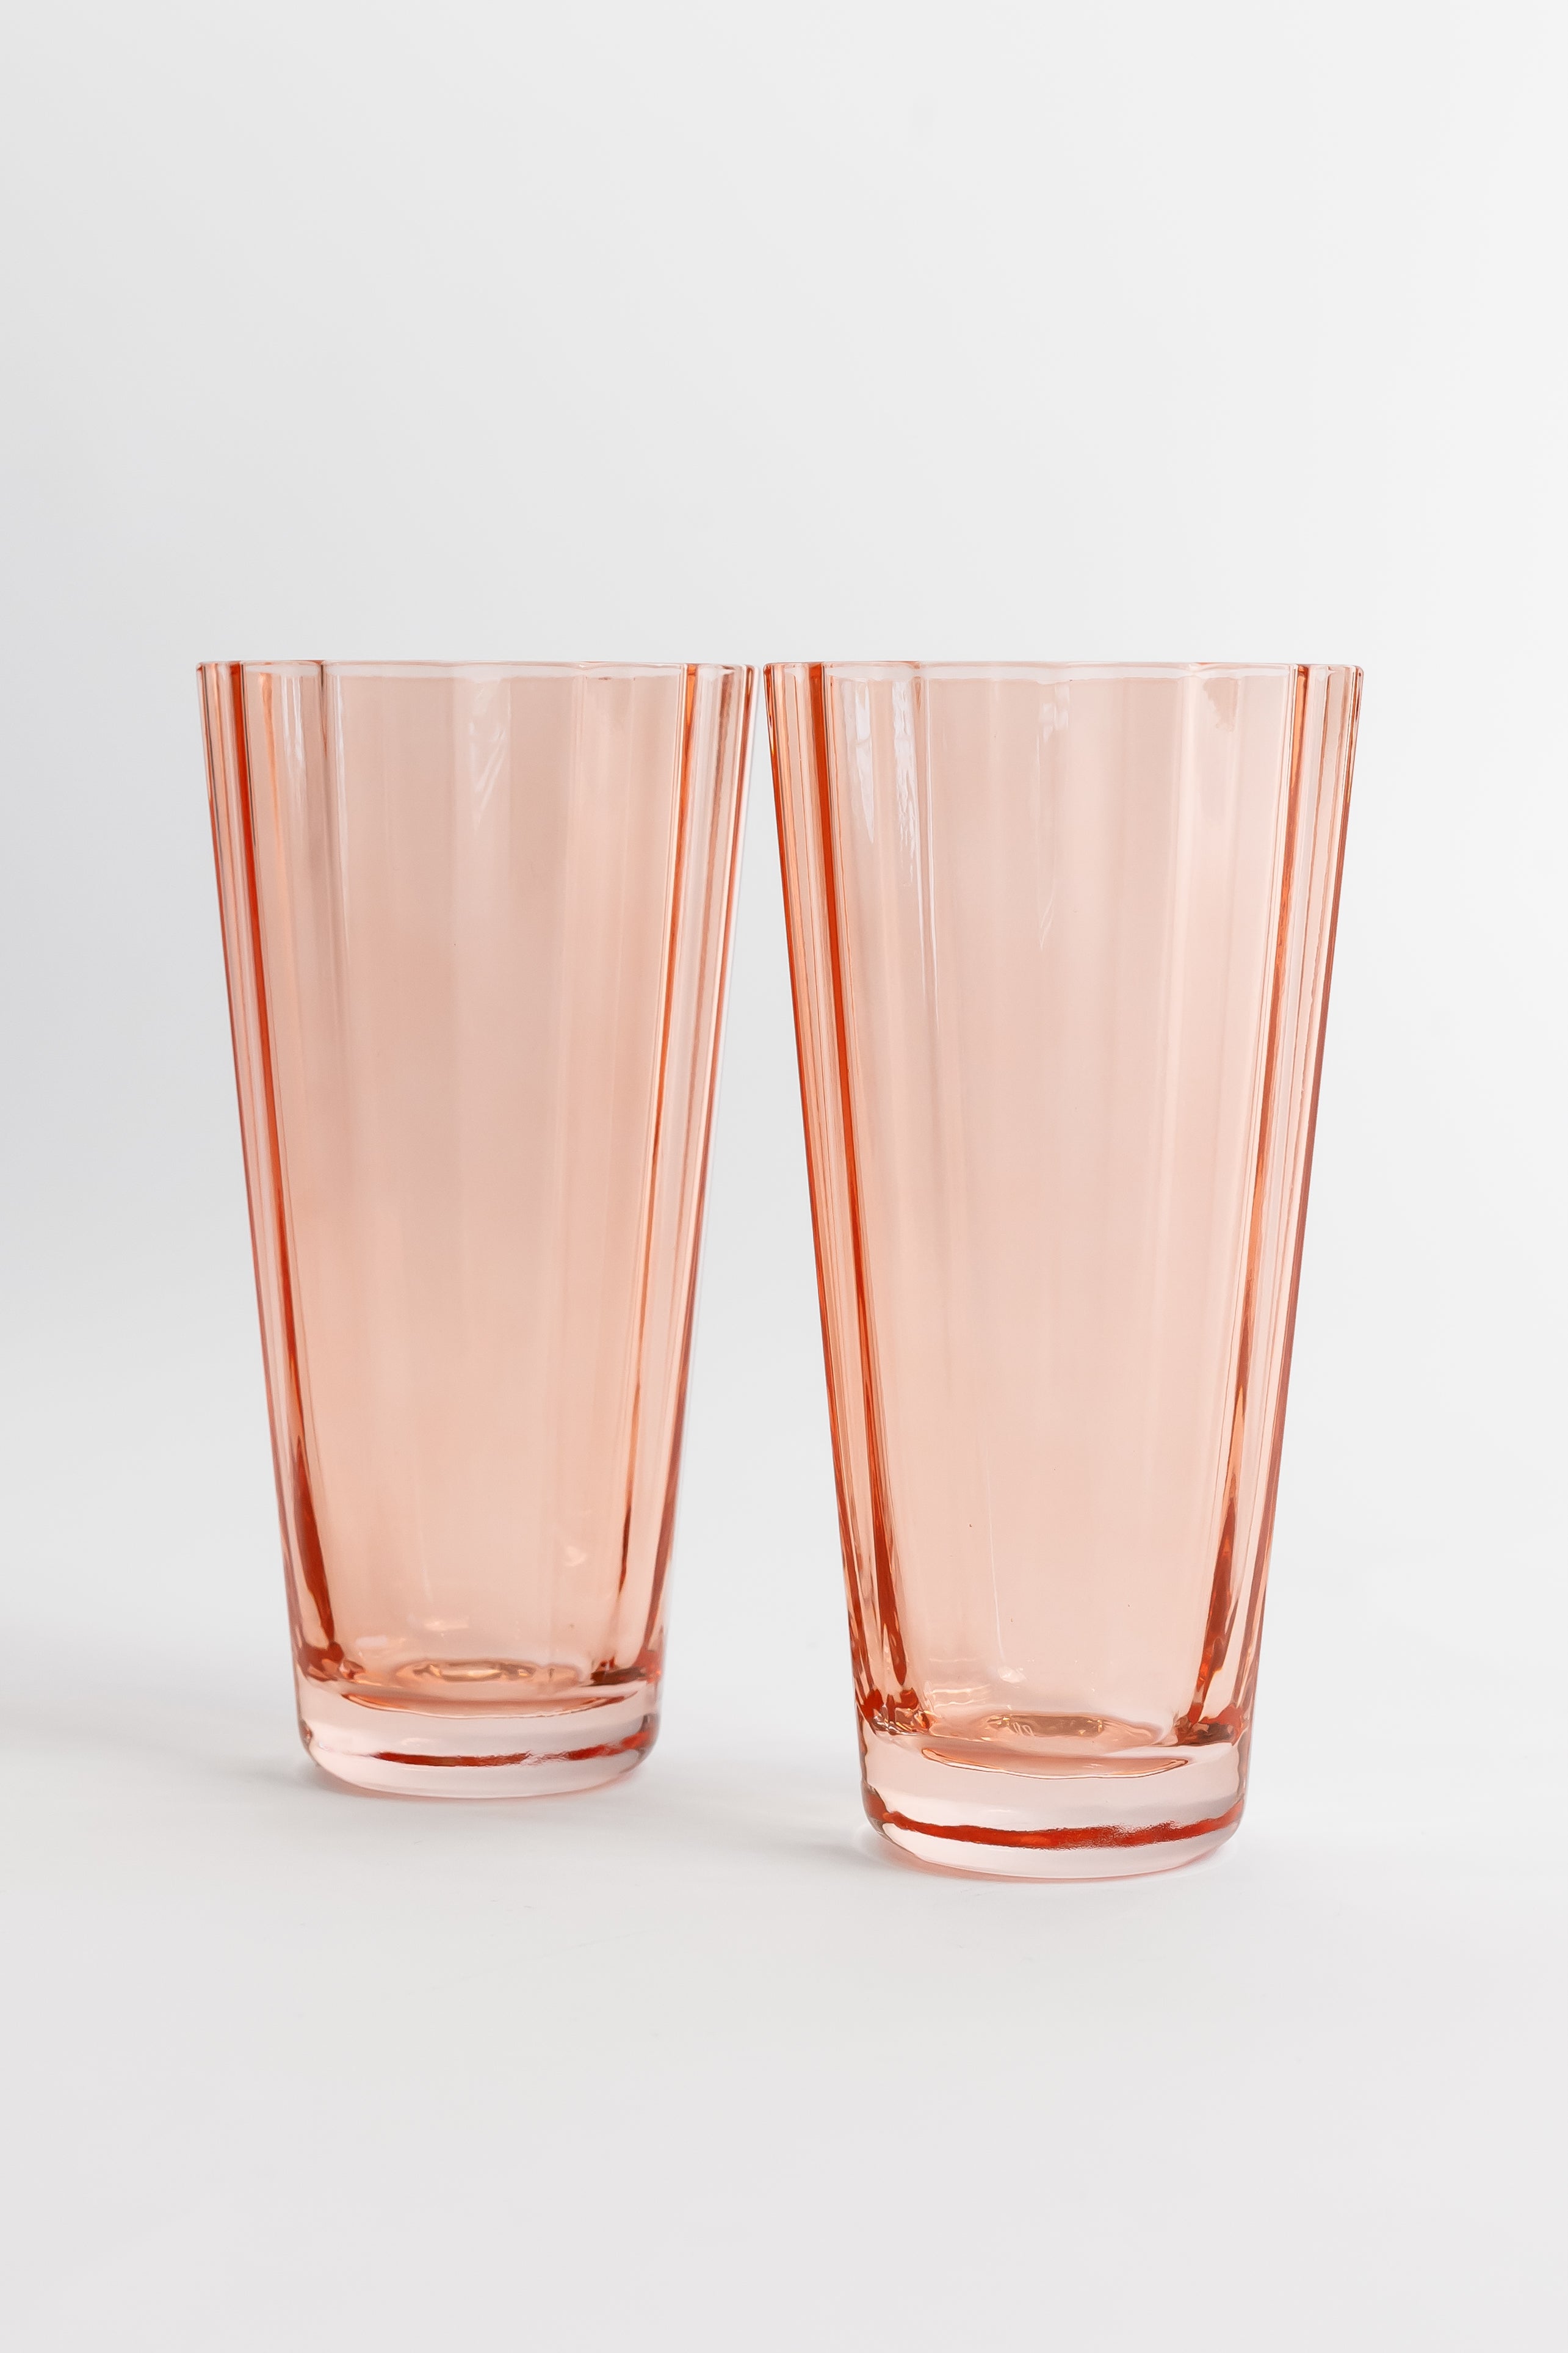 Estelle Colored Sunday High Balls - Set of 2- Peach Fuzz {Our Coral Peach Pink}